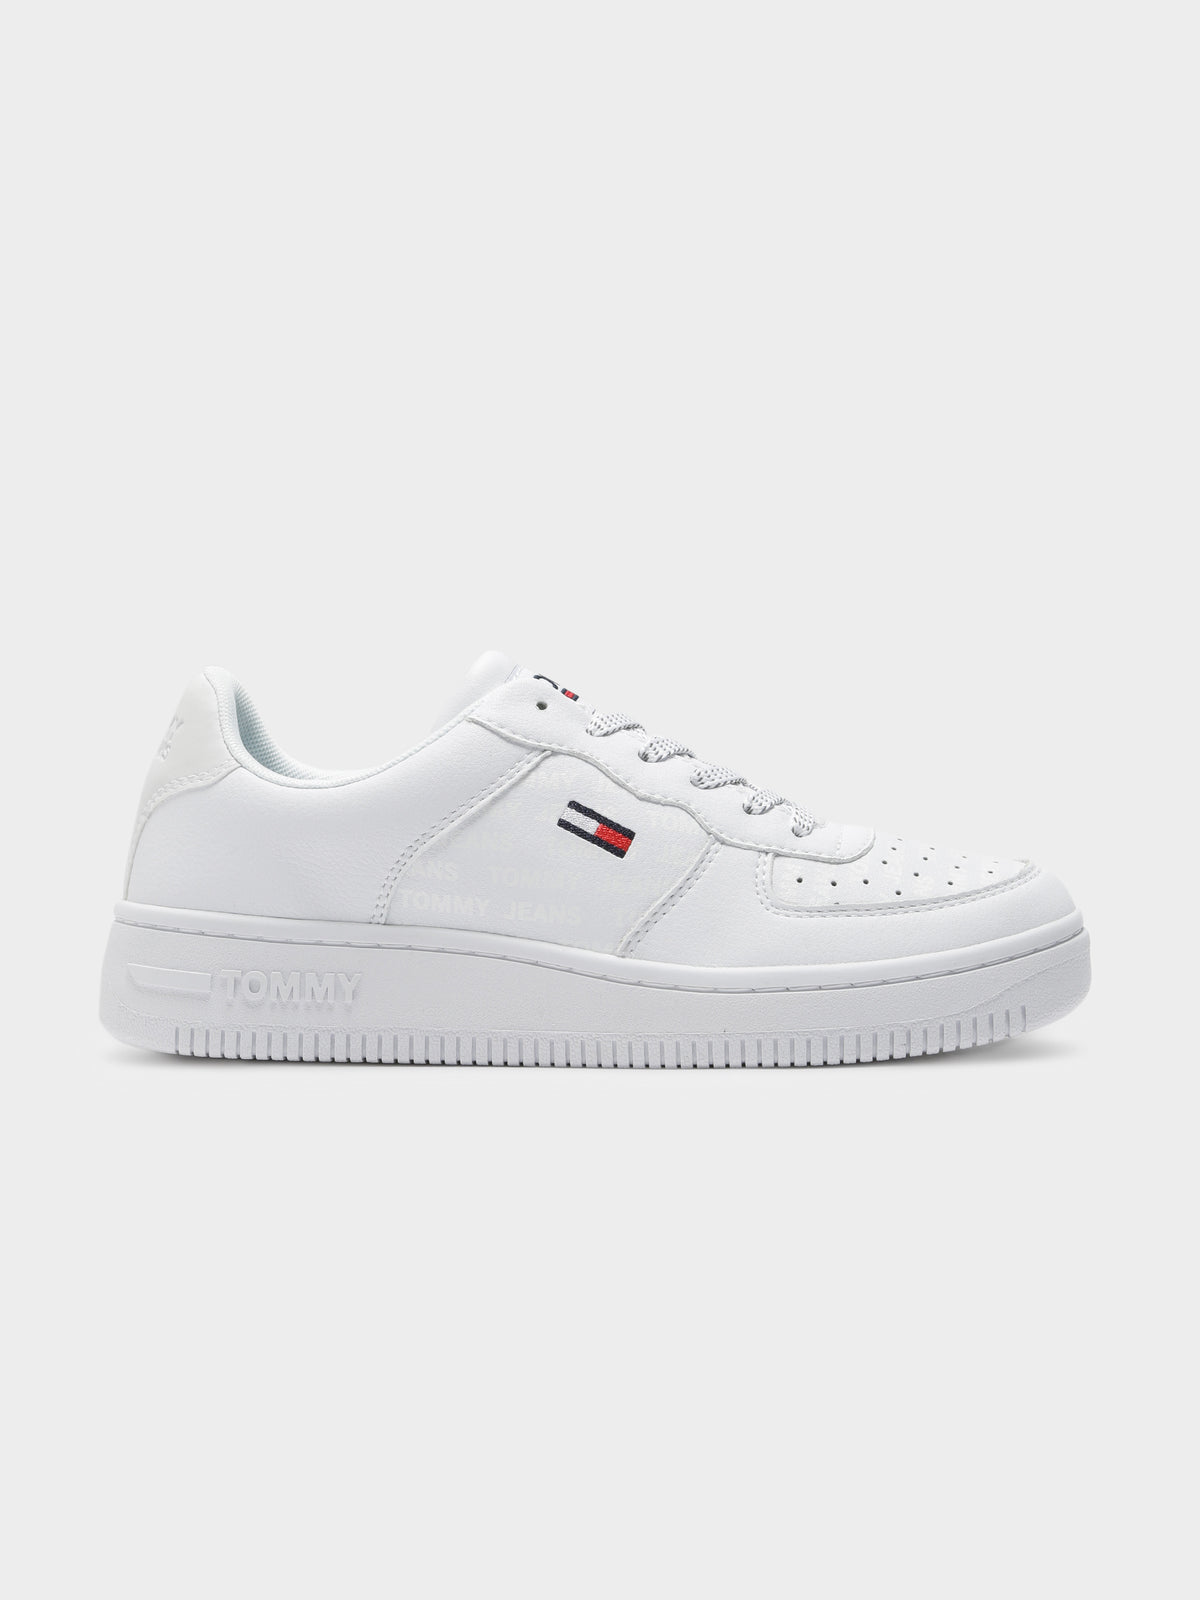 Womens Reflective Basket Sneakers in White